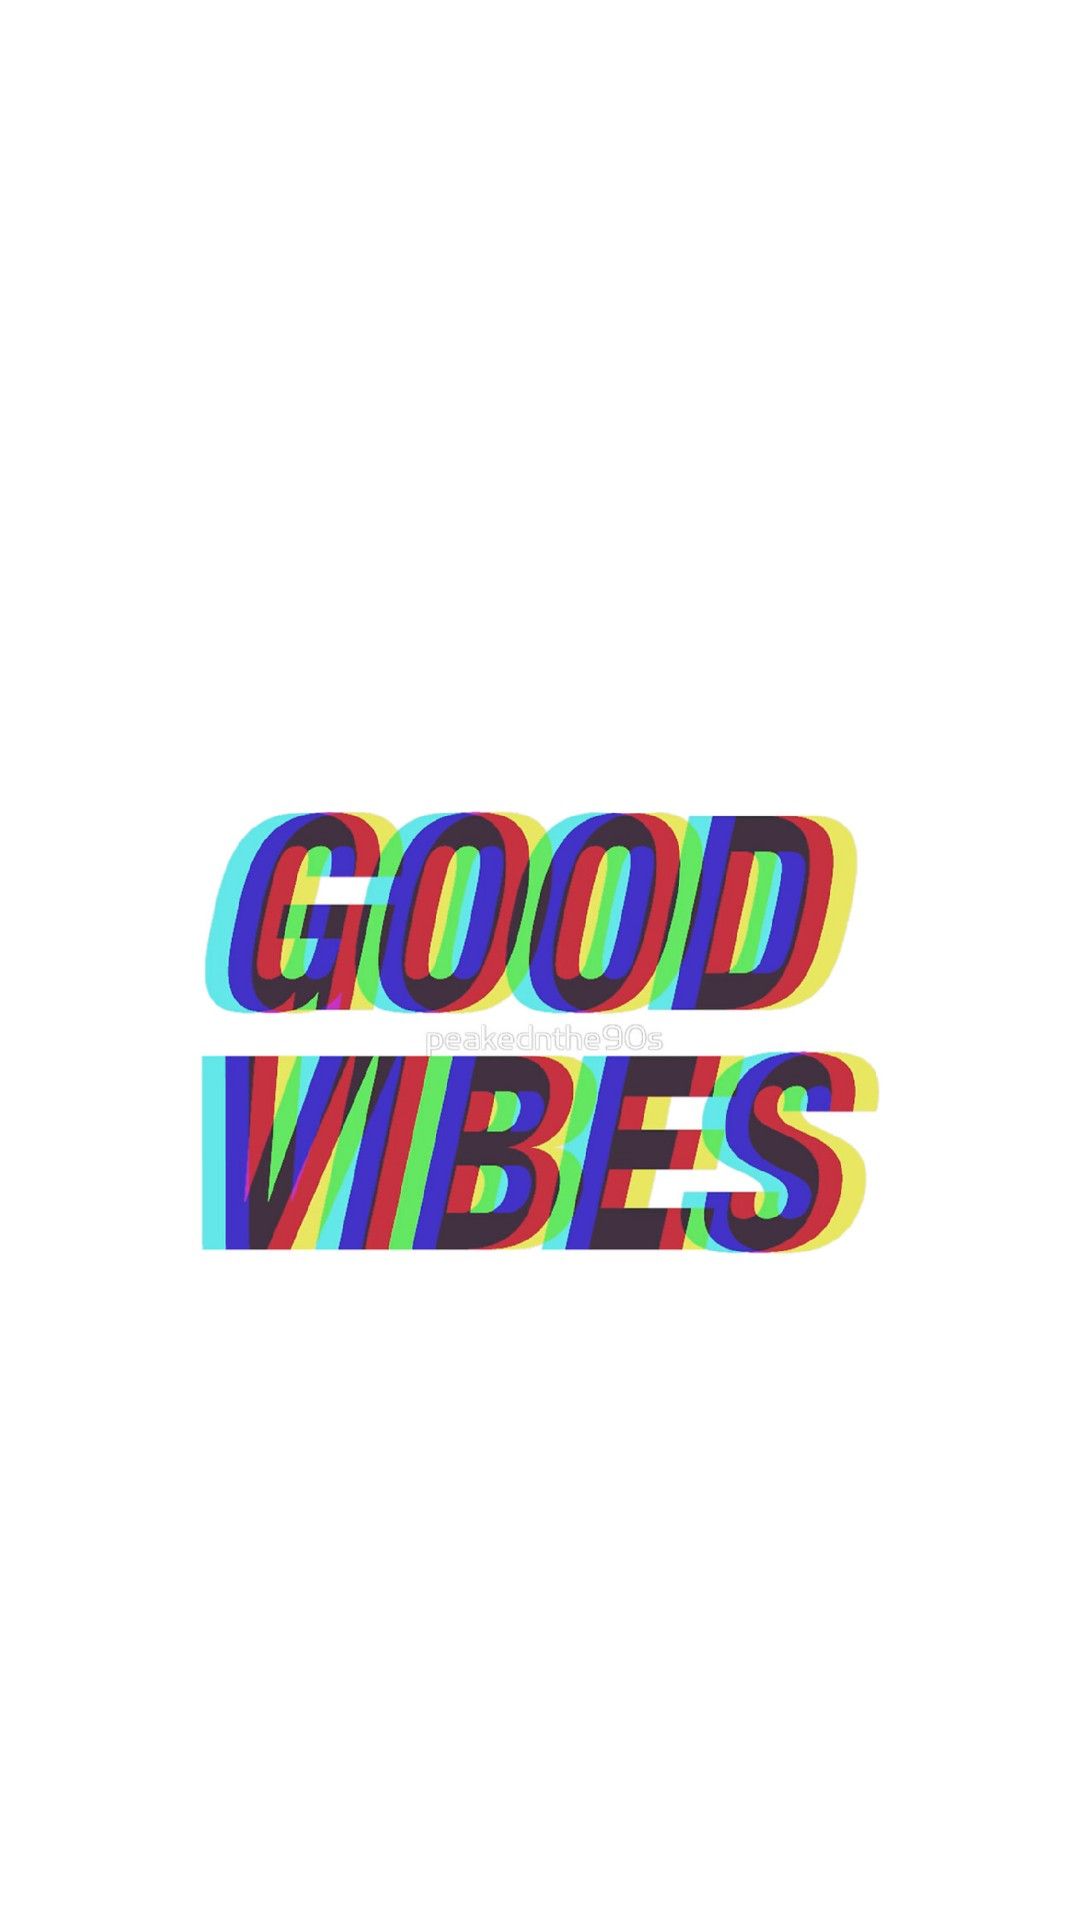 Wallpaper Good Vibes. Good vibes wallpaper, Wallpaper quotes, Good vibes only